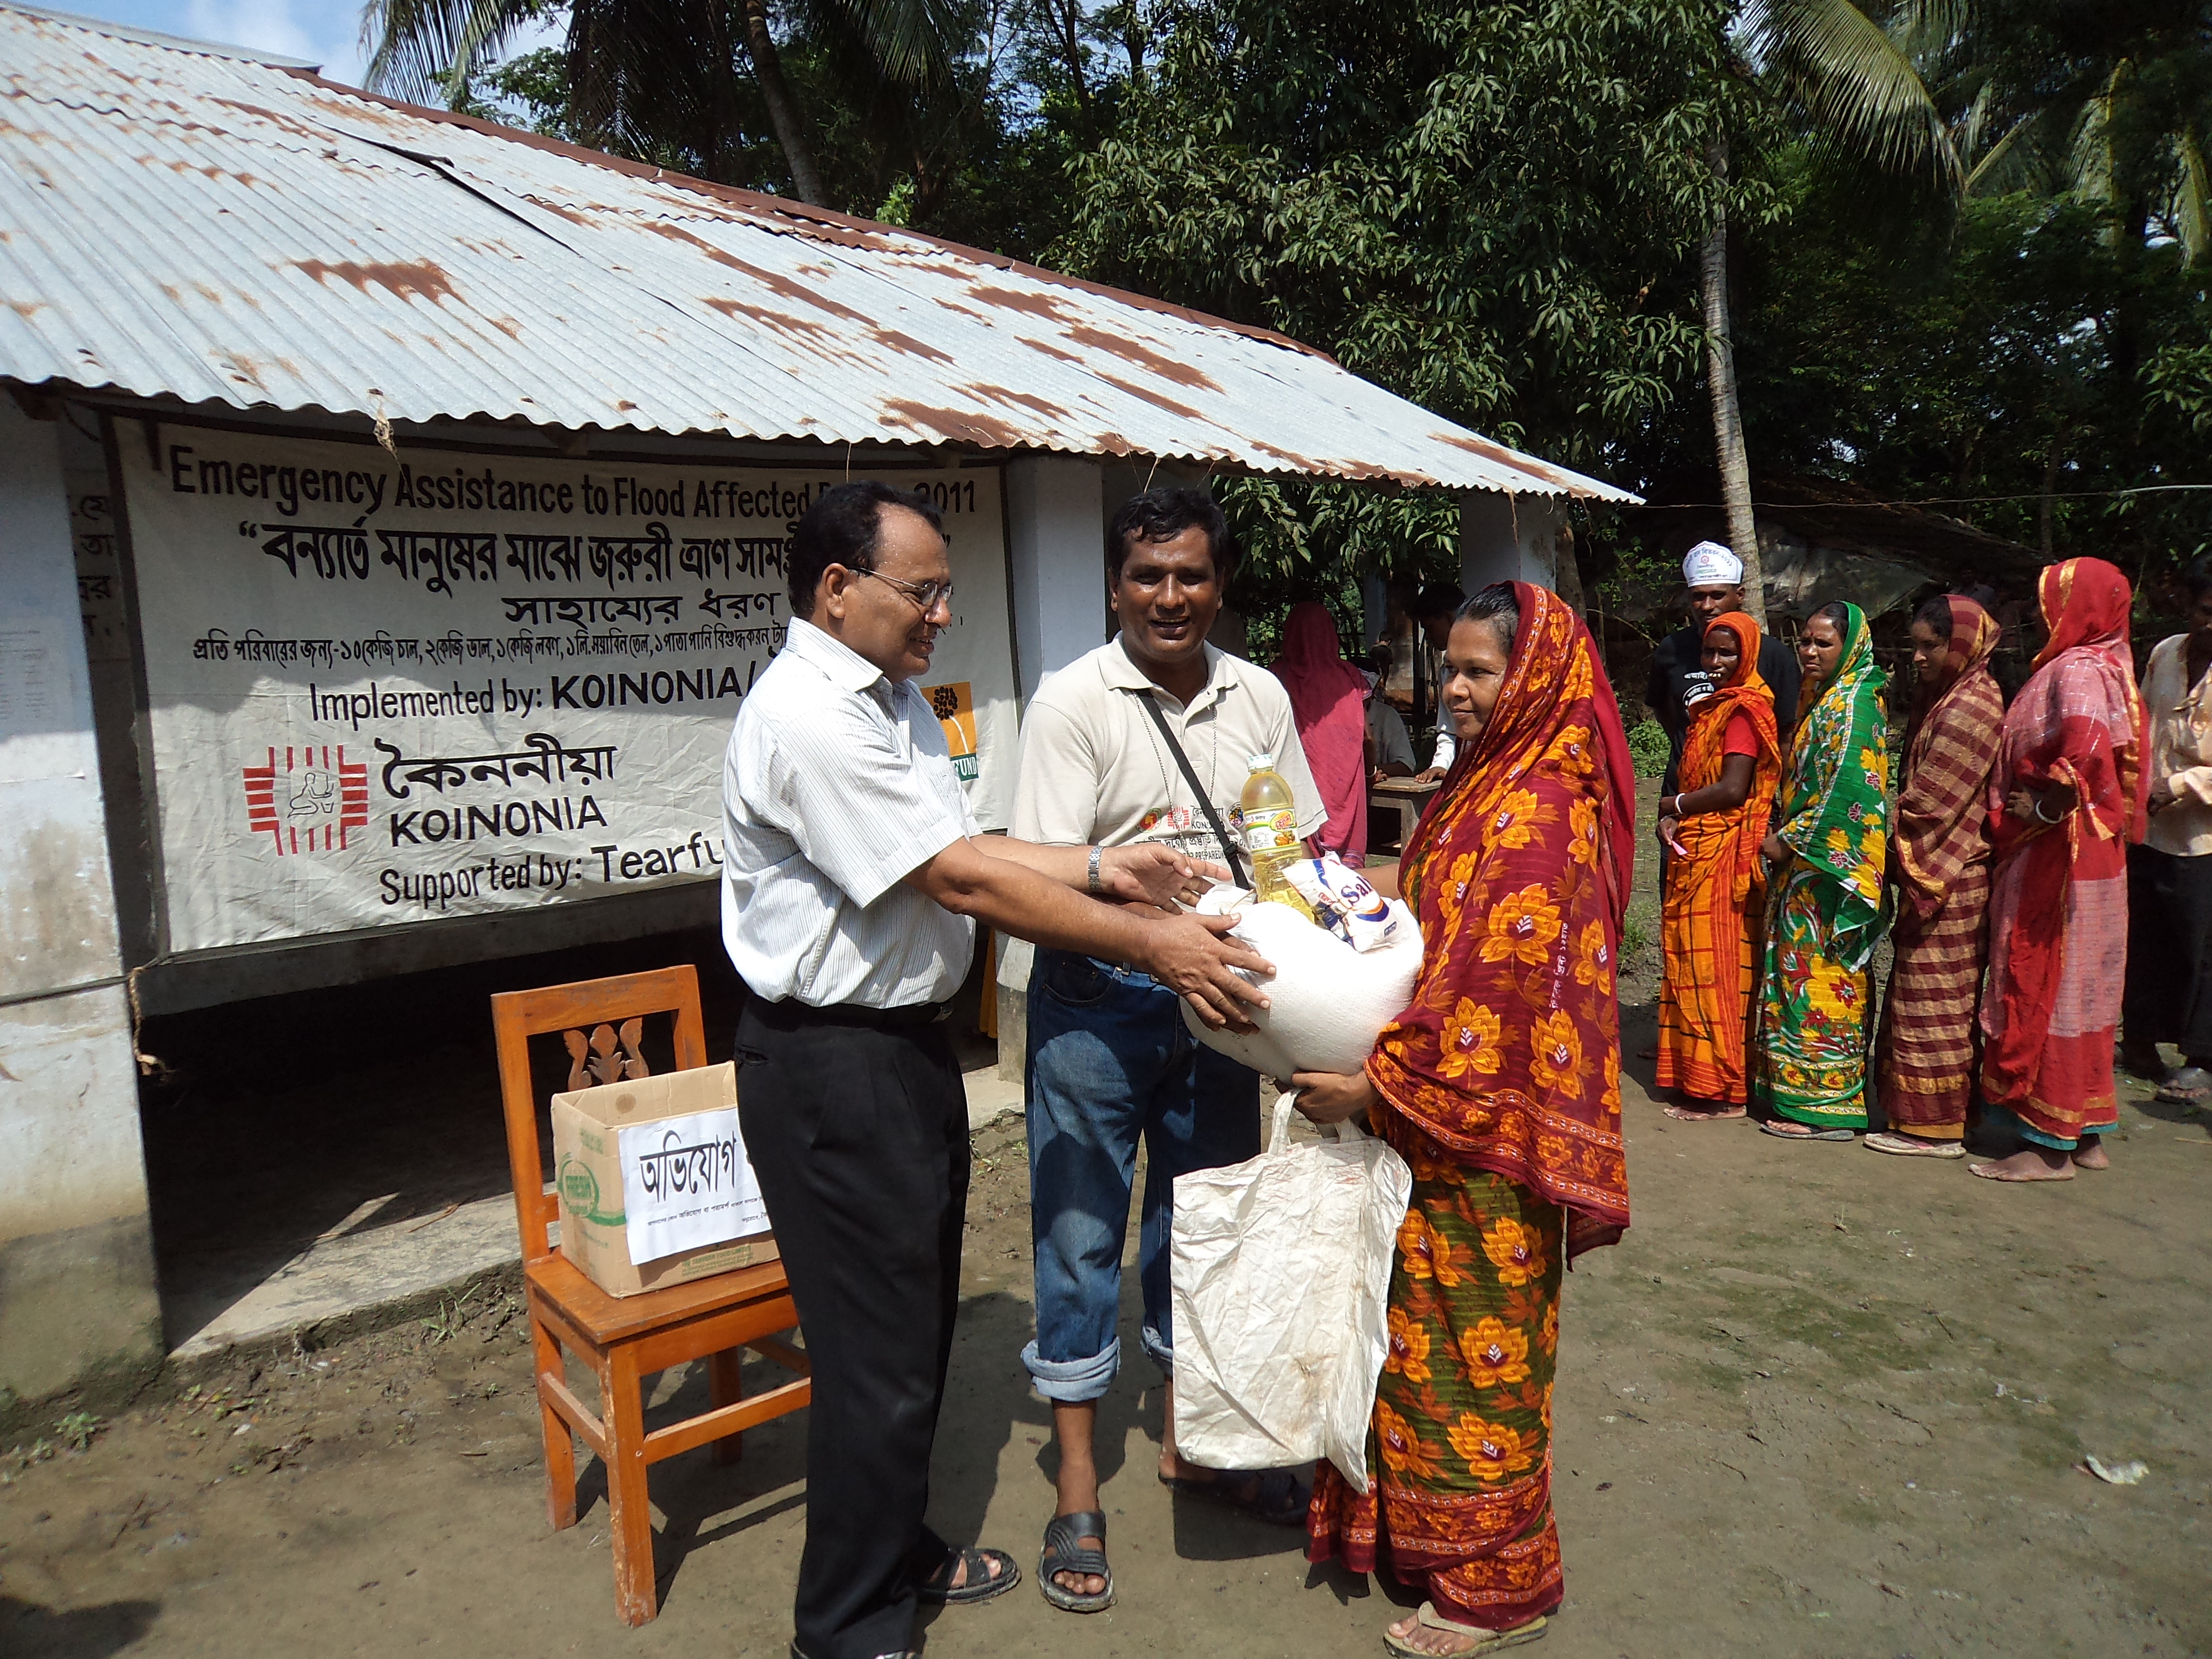 Emergency Assistance to Flood Affected People - 2011